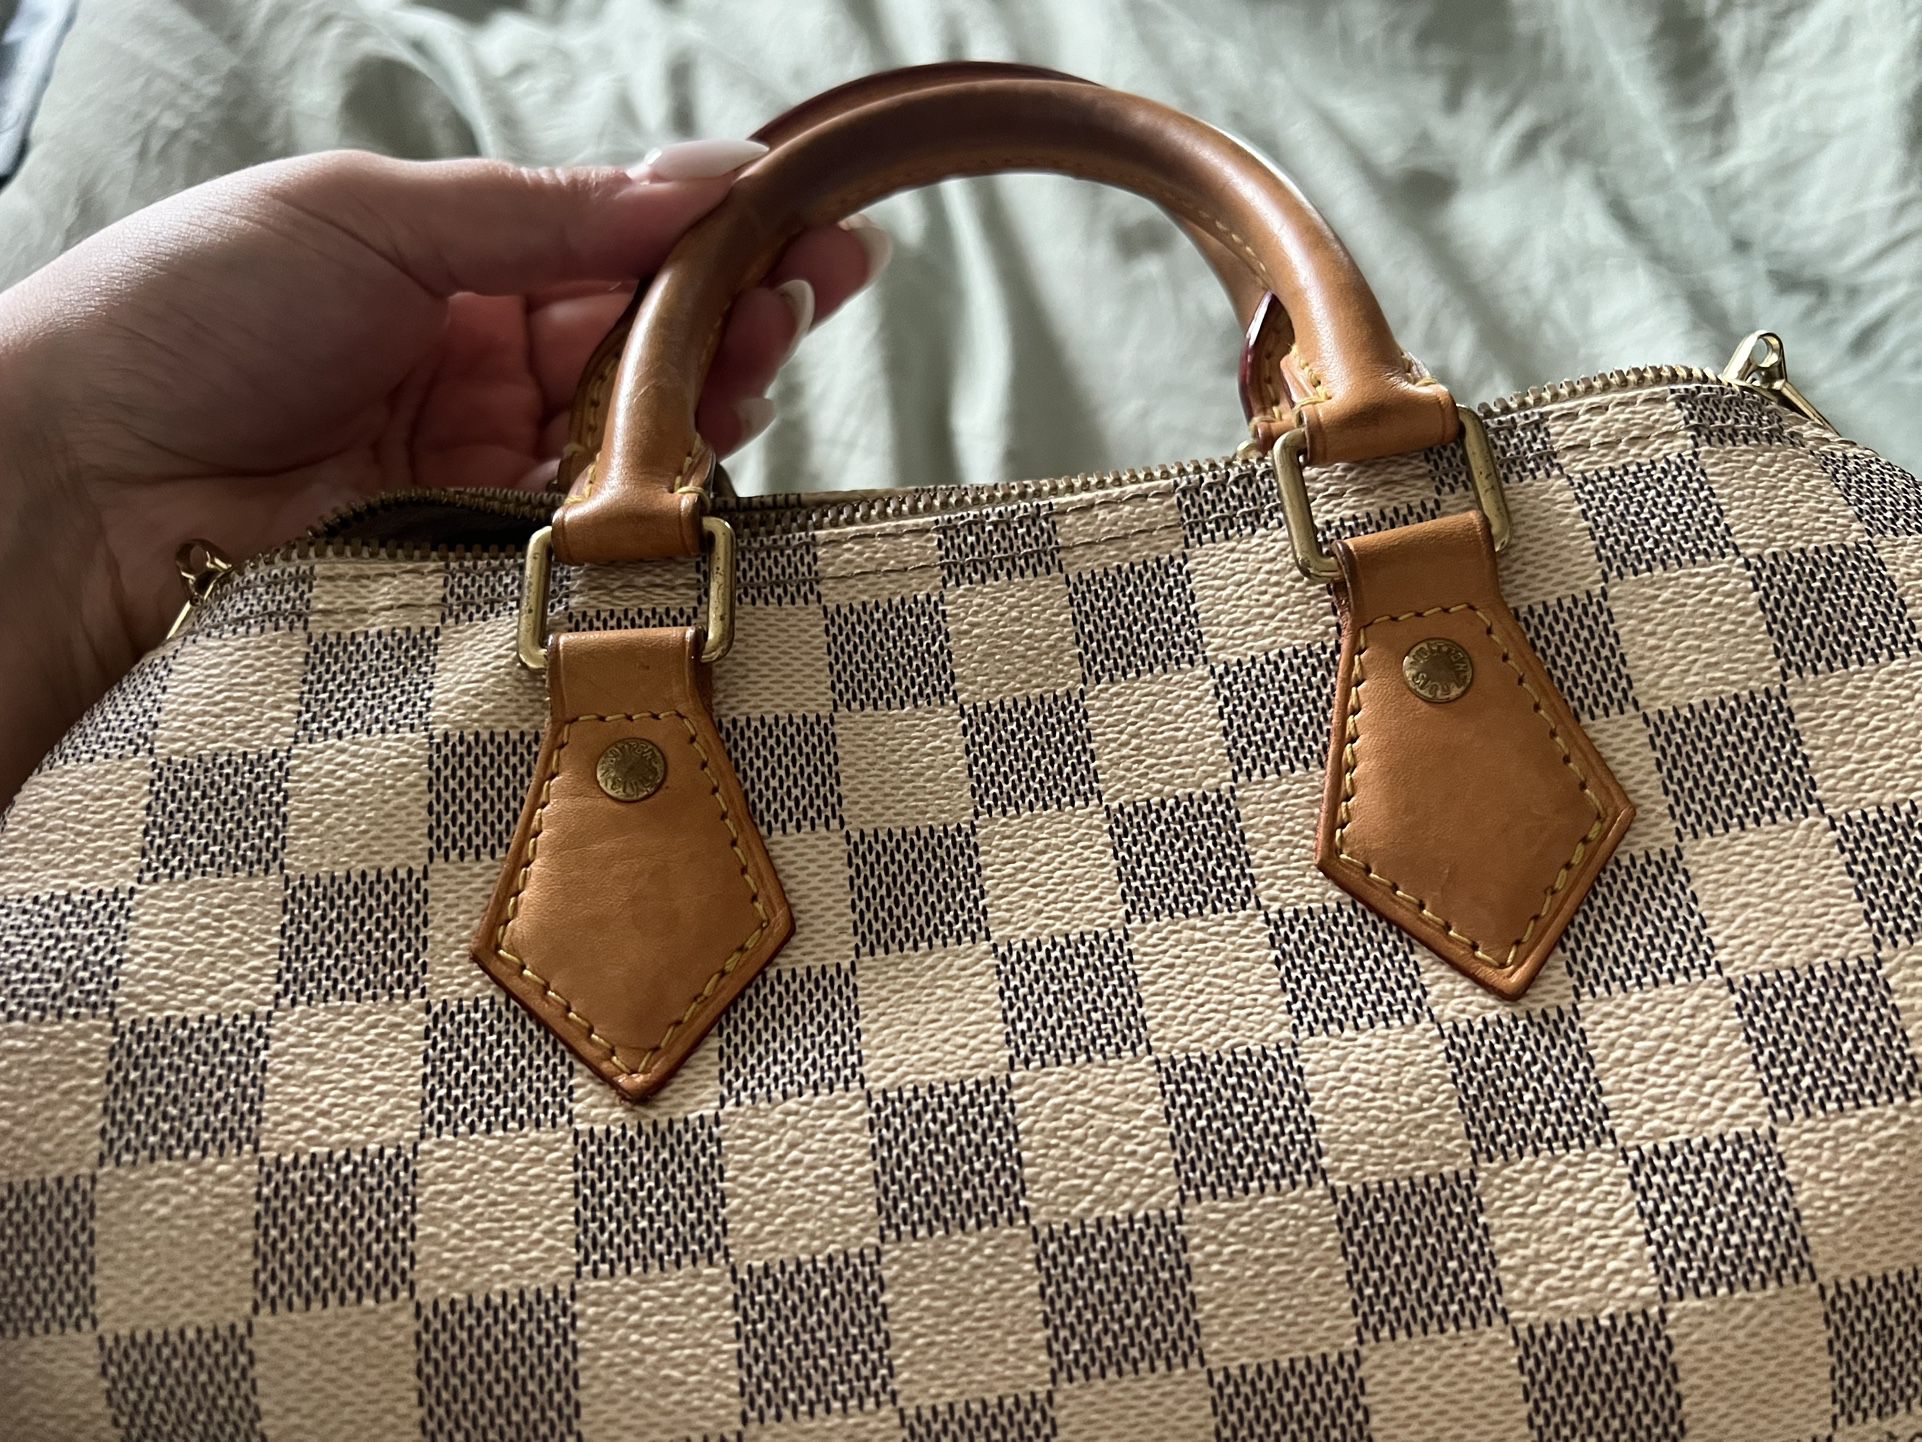 Authentic Louis Vuitton Speedy 25 With Strap for Sale in Corpus